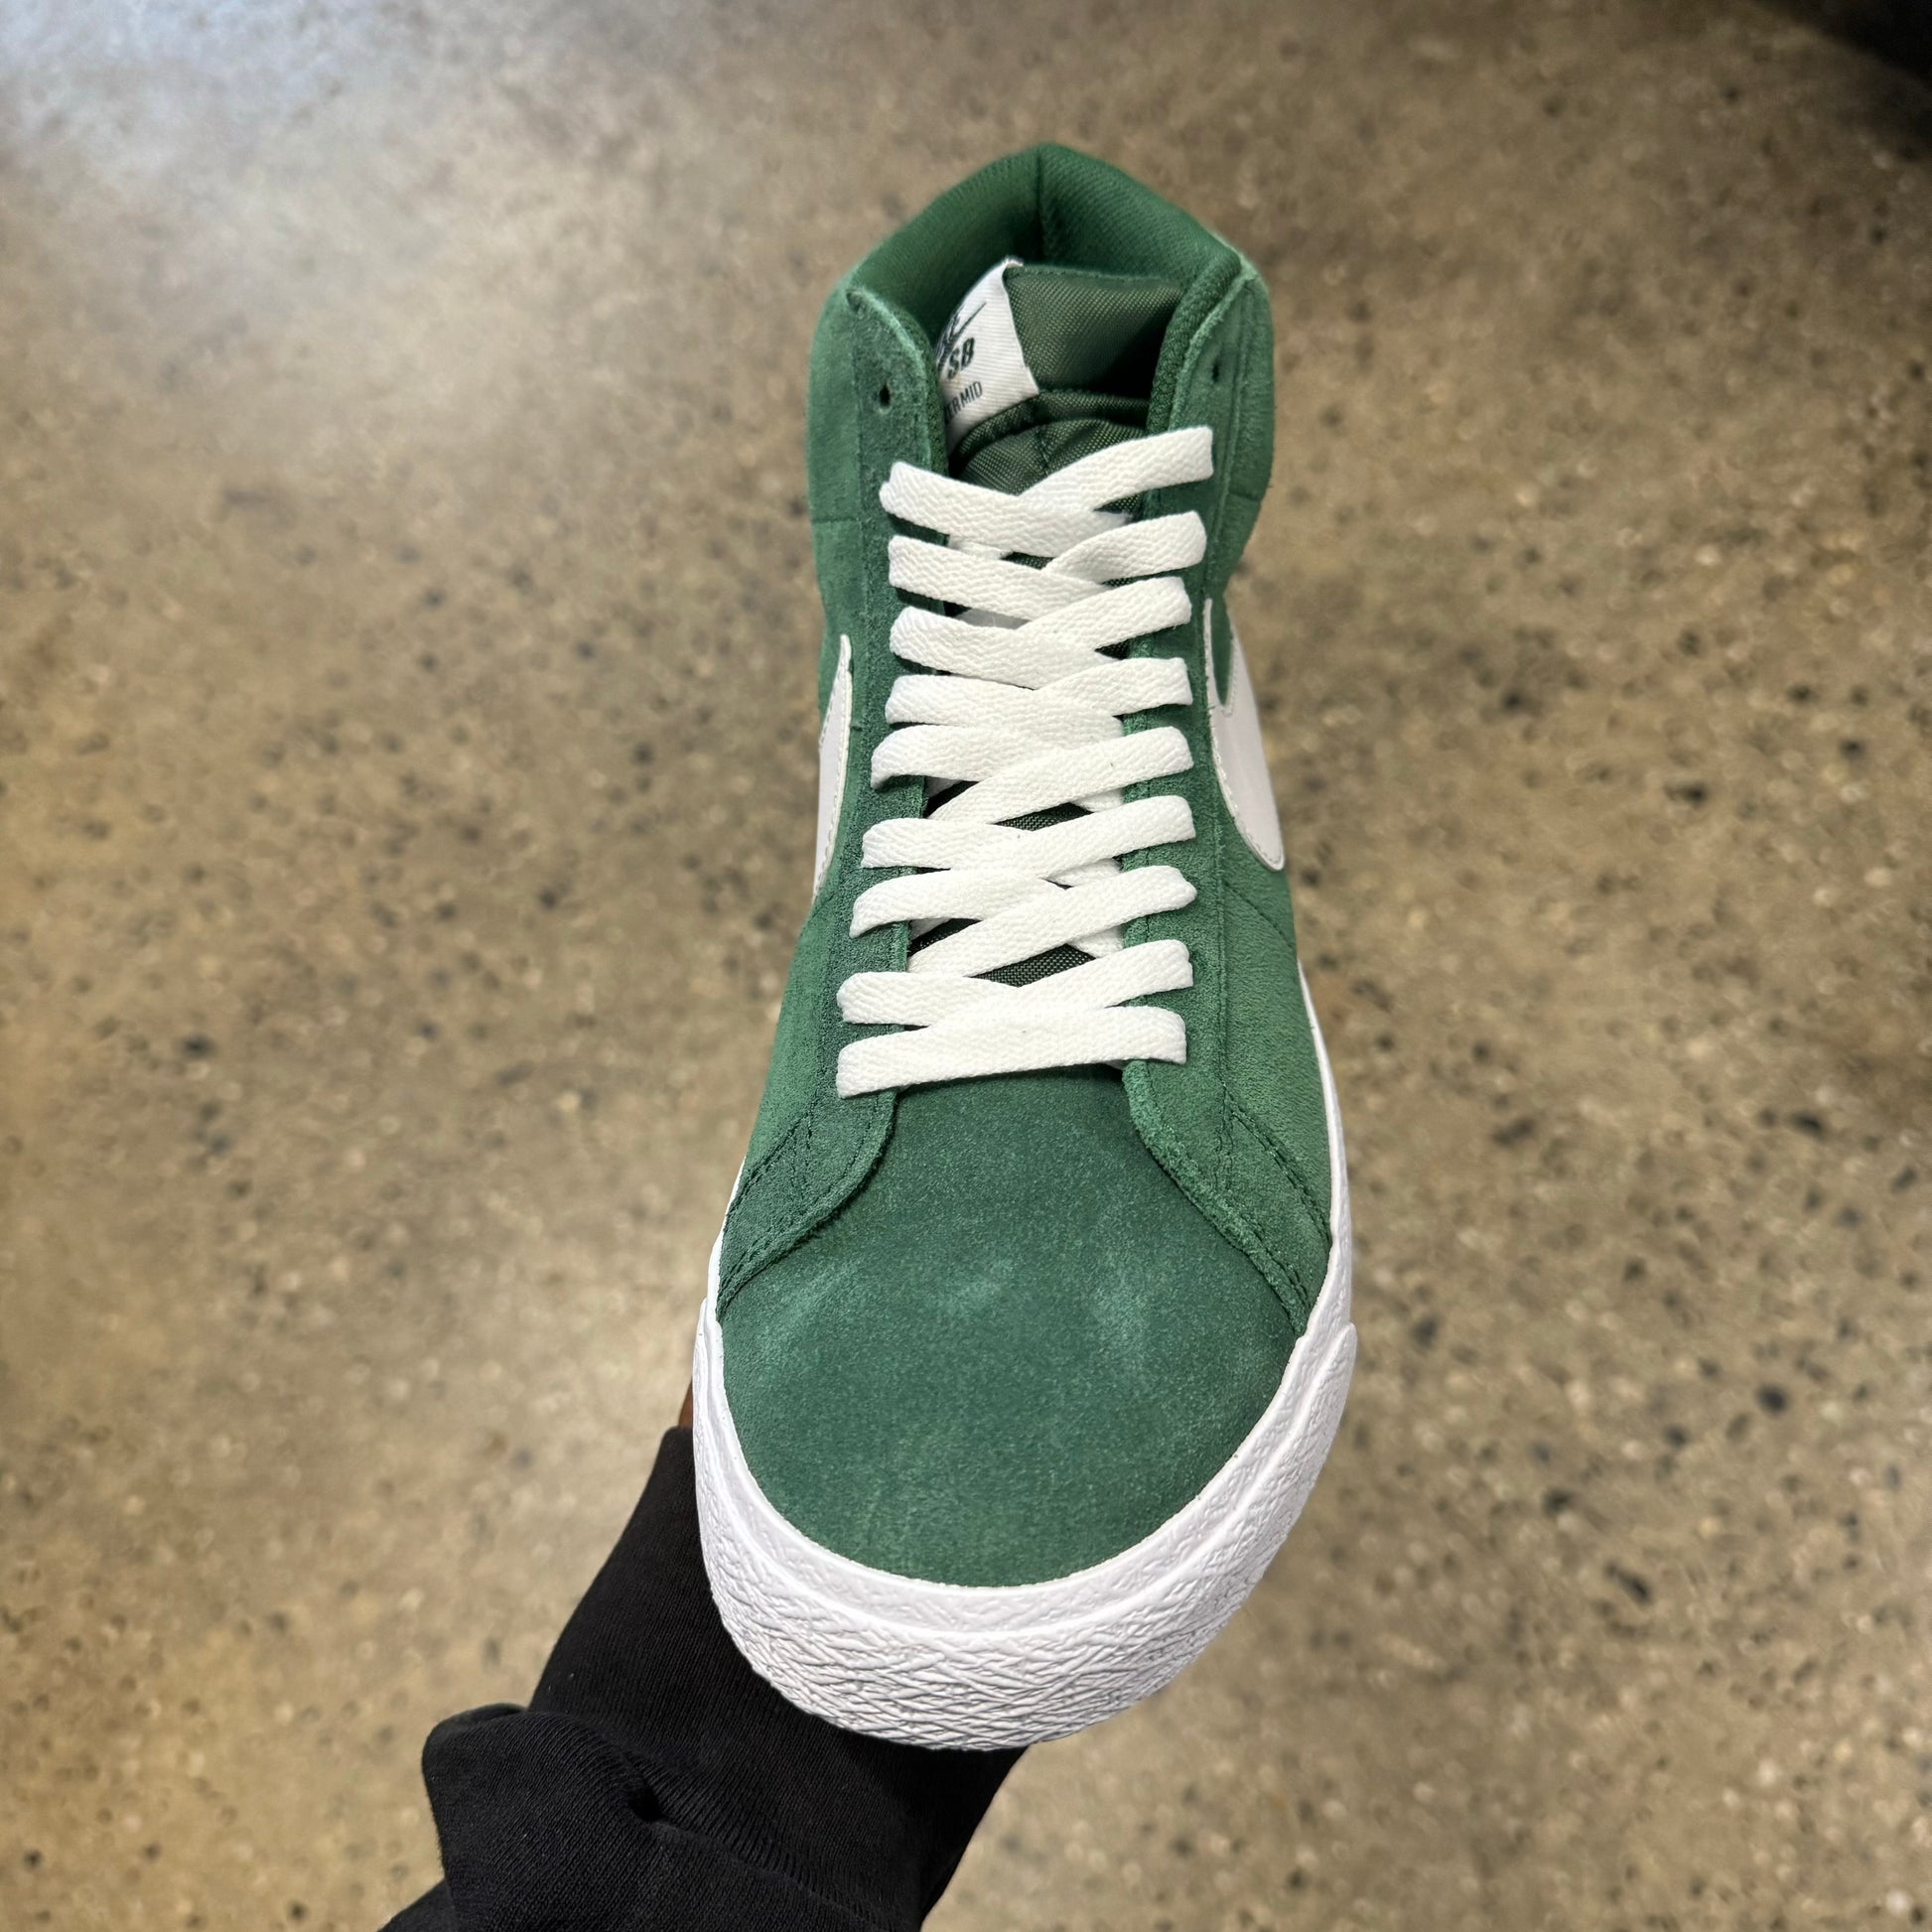 top down view of green suede sneaker with white laces and white sole